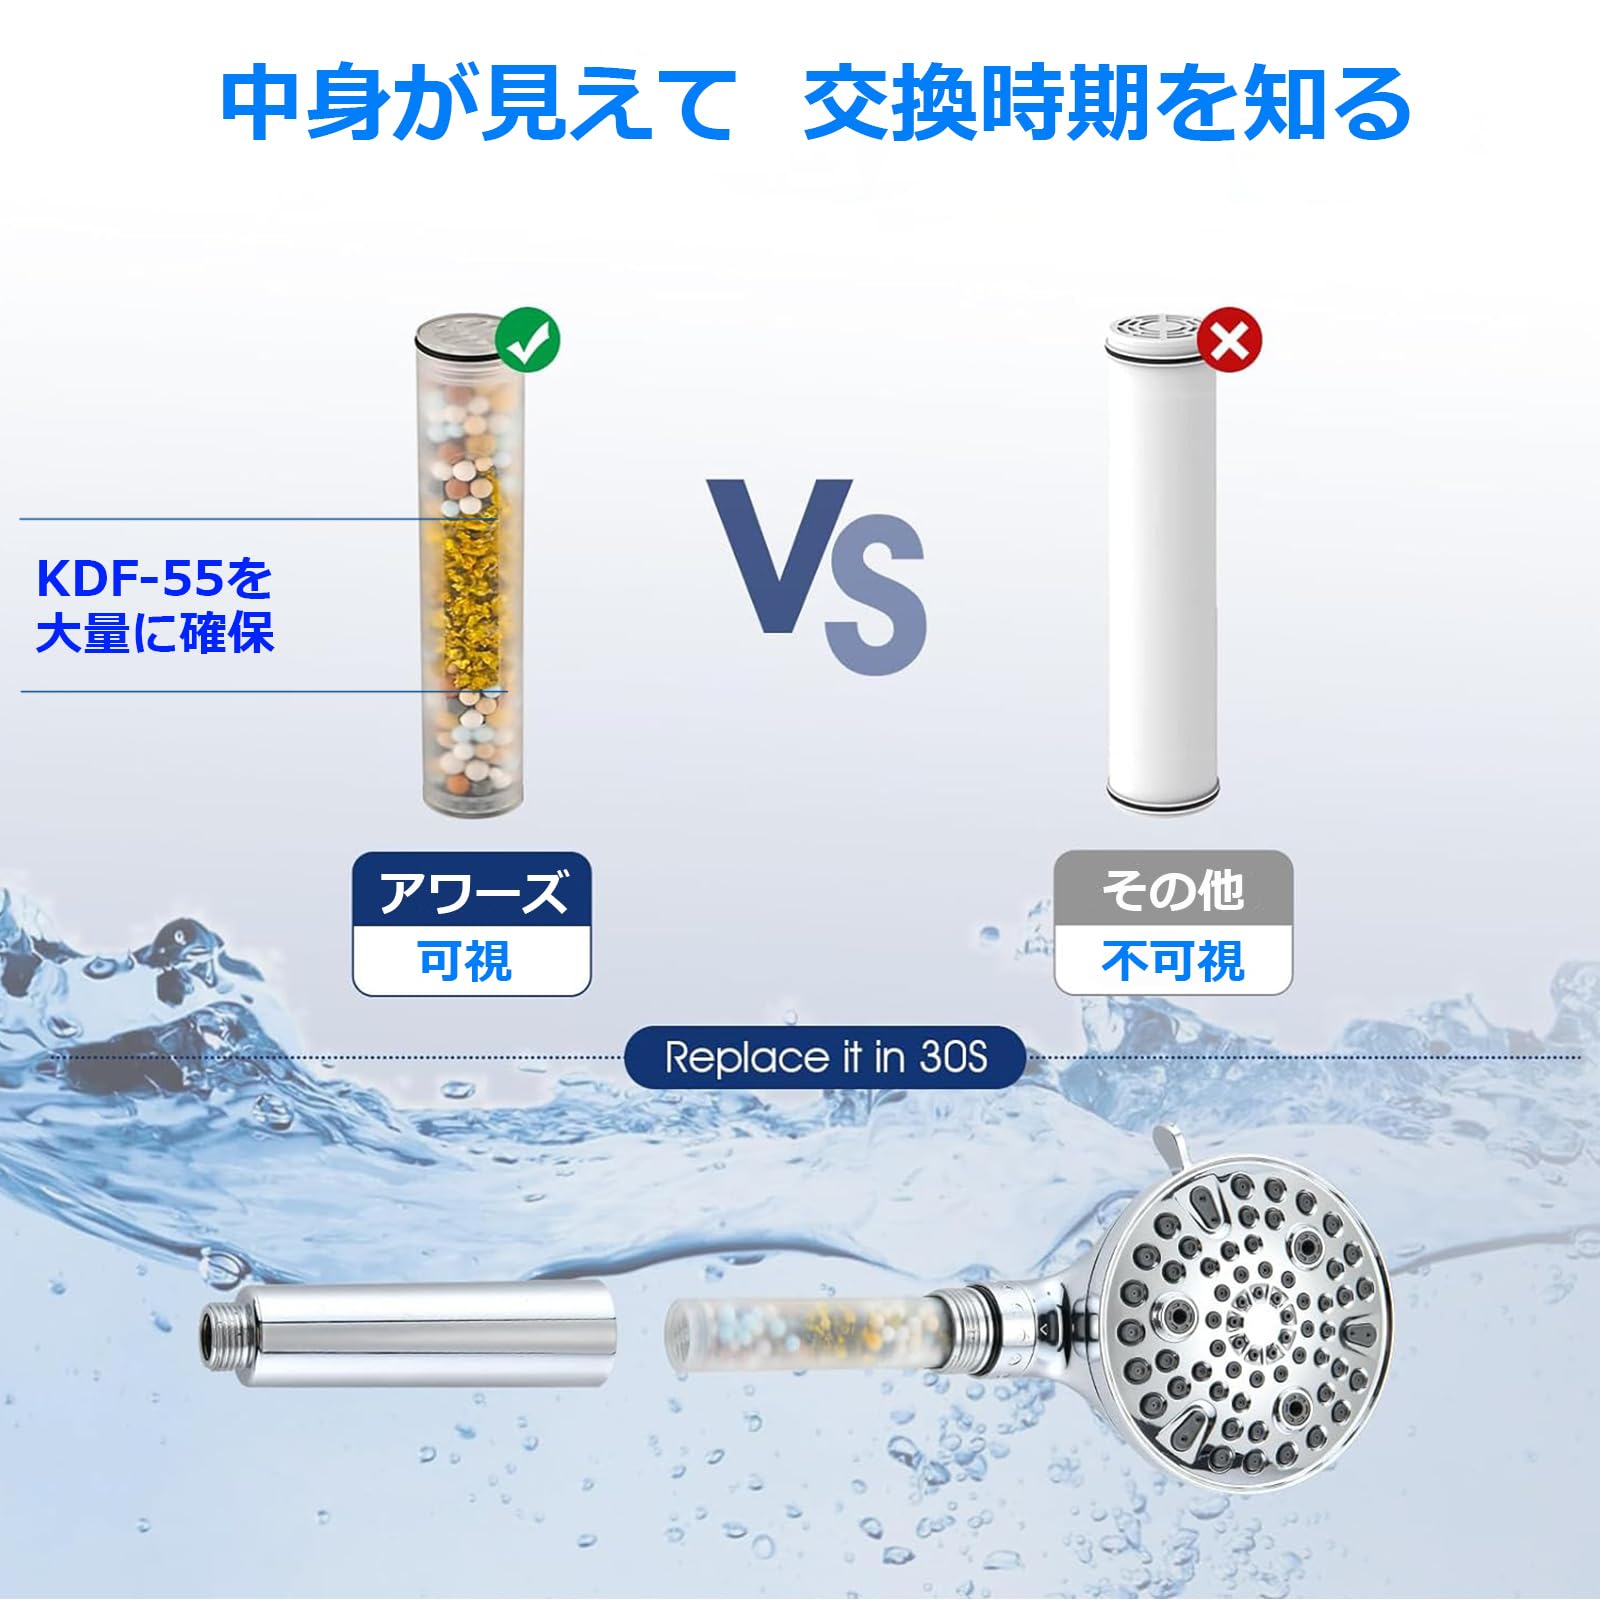 CoolWAY High Pressure Handheld Shower Head 12cm Large,10-mode spray with Hard Water Filter, Removes chlorine,heavy metals and other impurities and moisturizes skin,Powerful flushing function